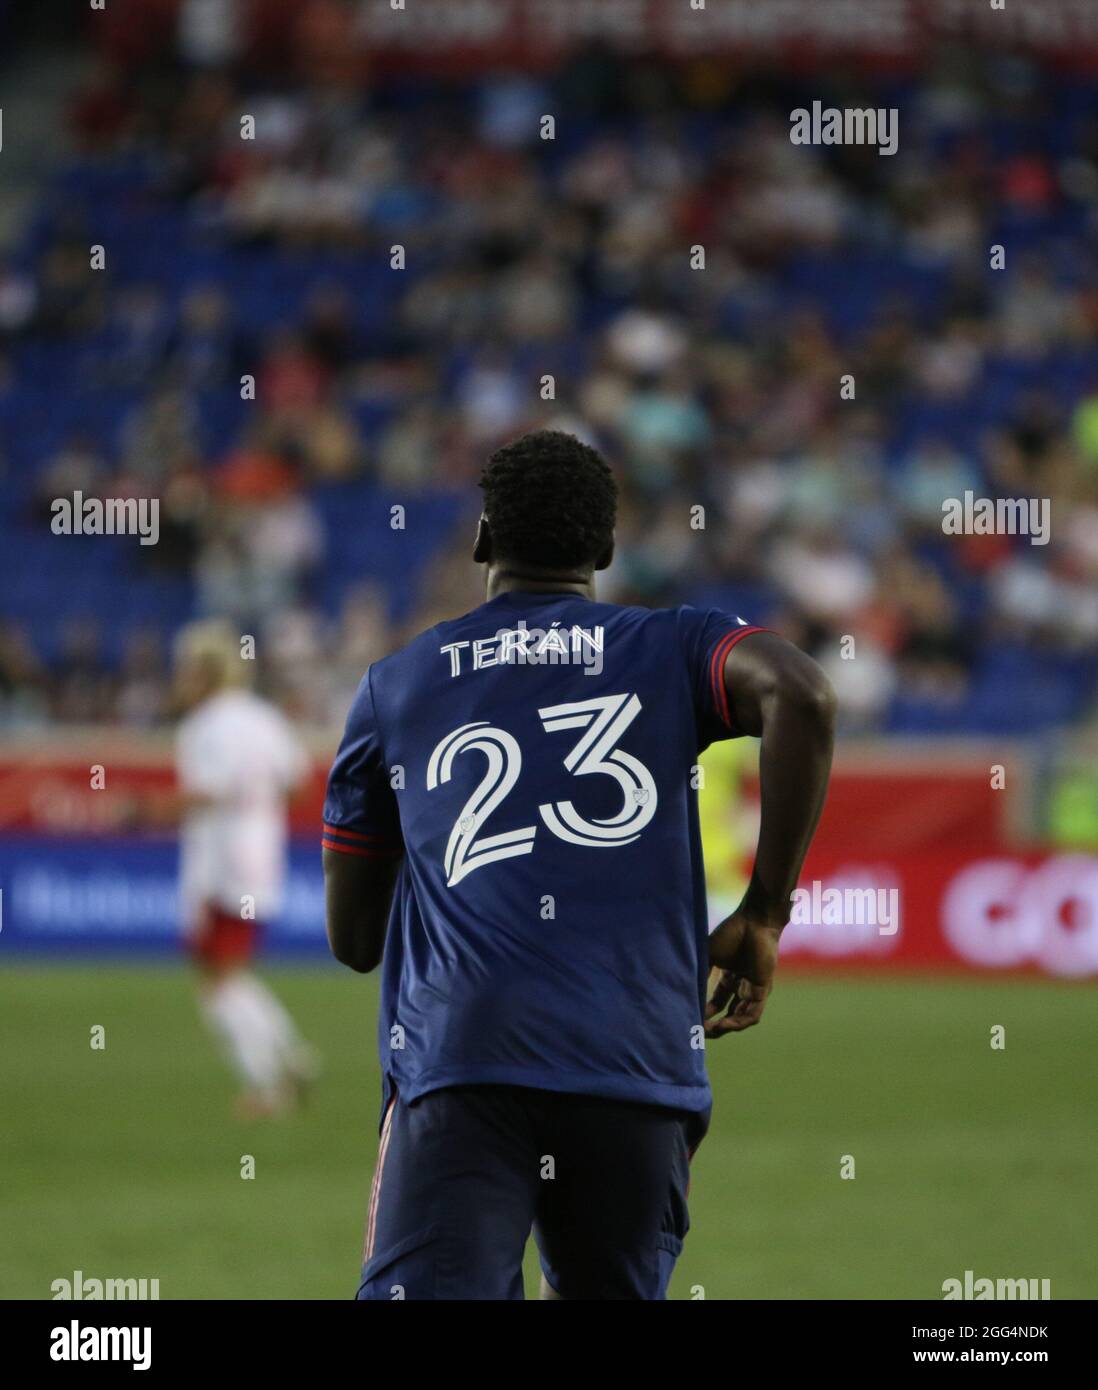 Harrison, United States . 28th Aug, 2021. Carlos Terán (23, Chicago Fire FC) during the Major League Soccer game between New York Red Bulls and Chicago Fire FC at Red Bull Arena in Harrison, New Jersey. Credit: SPP Sport Press Photo. /Alamy Live News Stock Photo